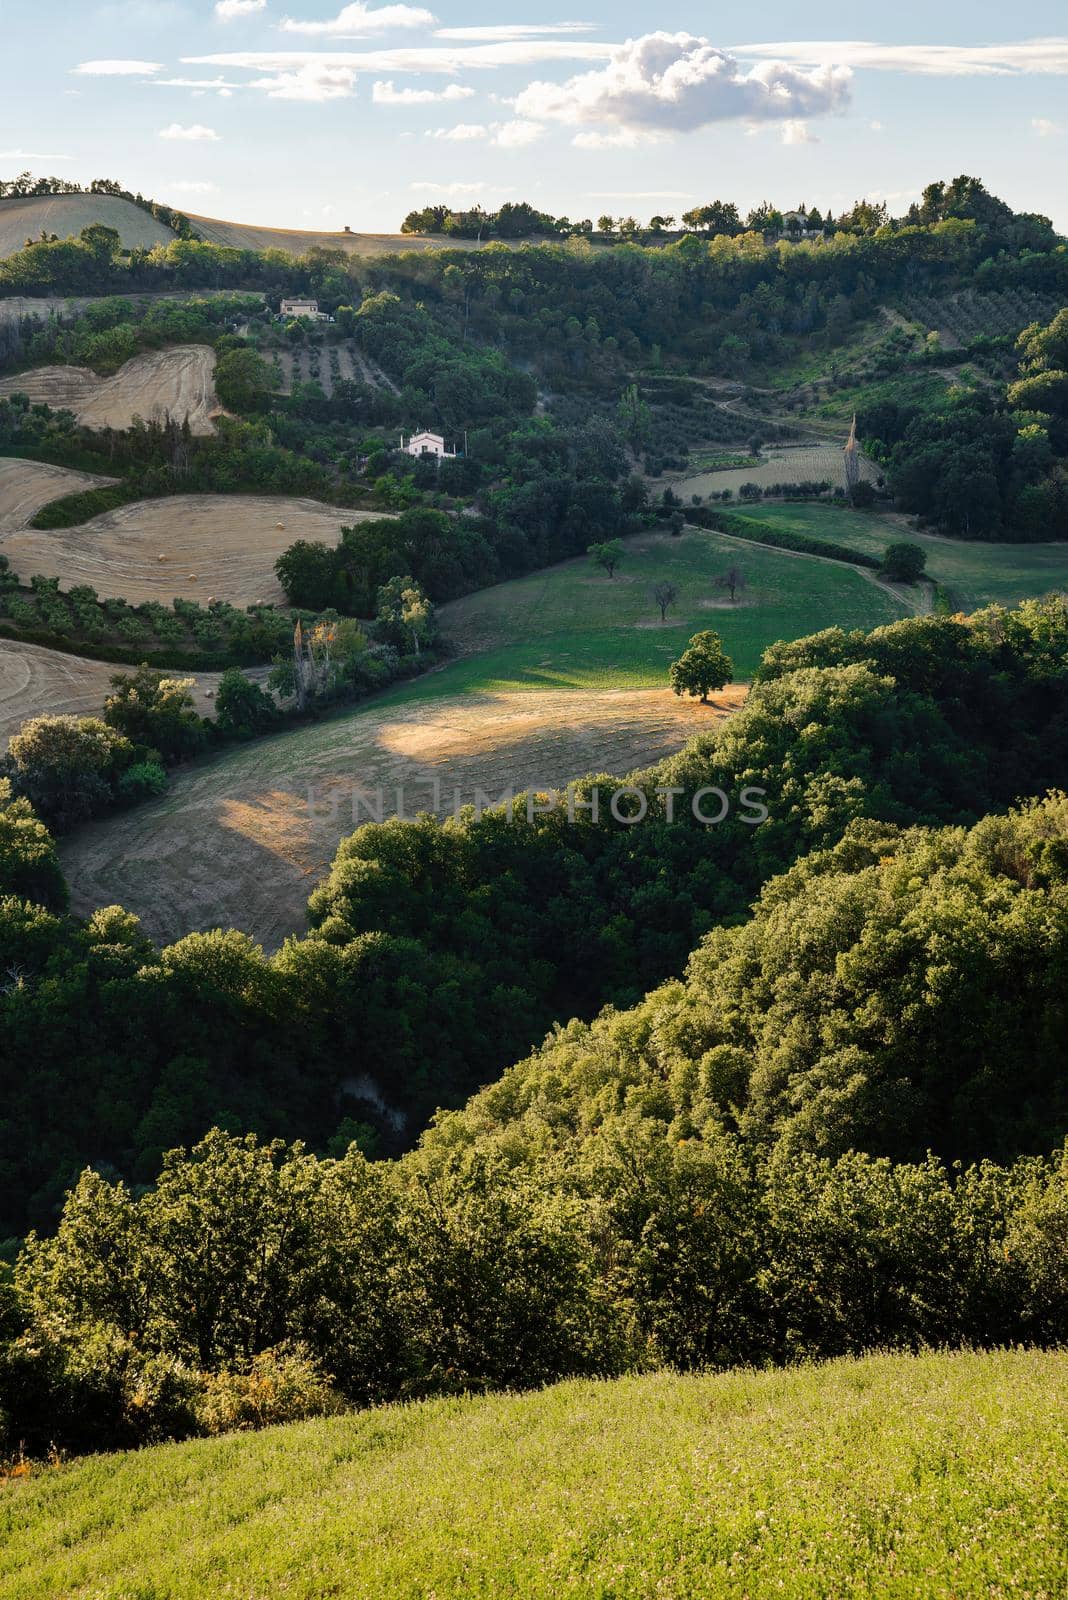 View of the fields and trees near Belvedere Fogliense in the Marche region of Italy by MaxalTamor